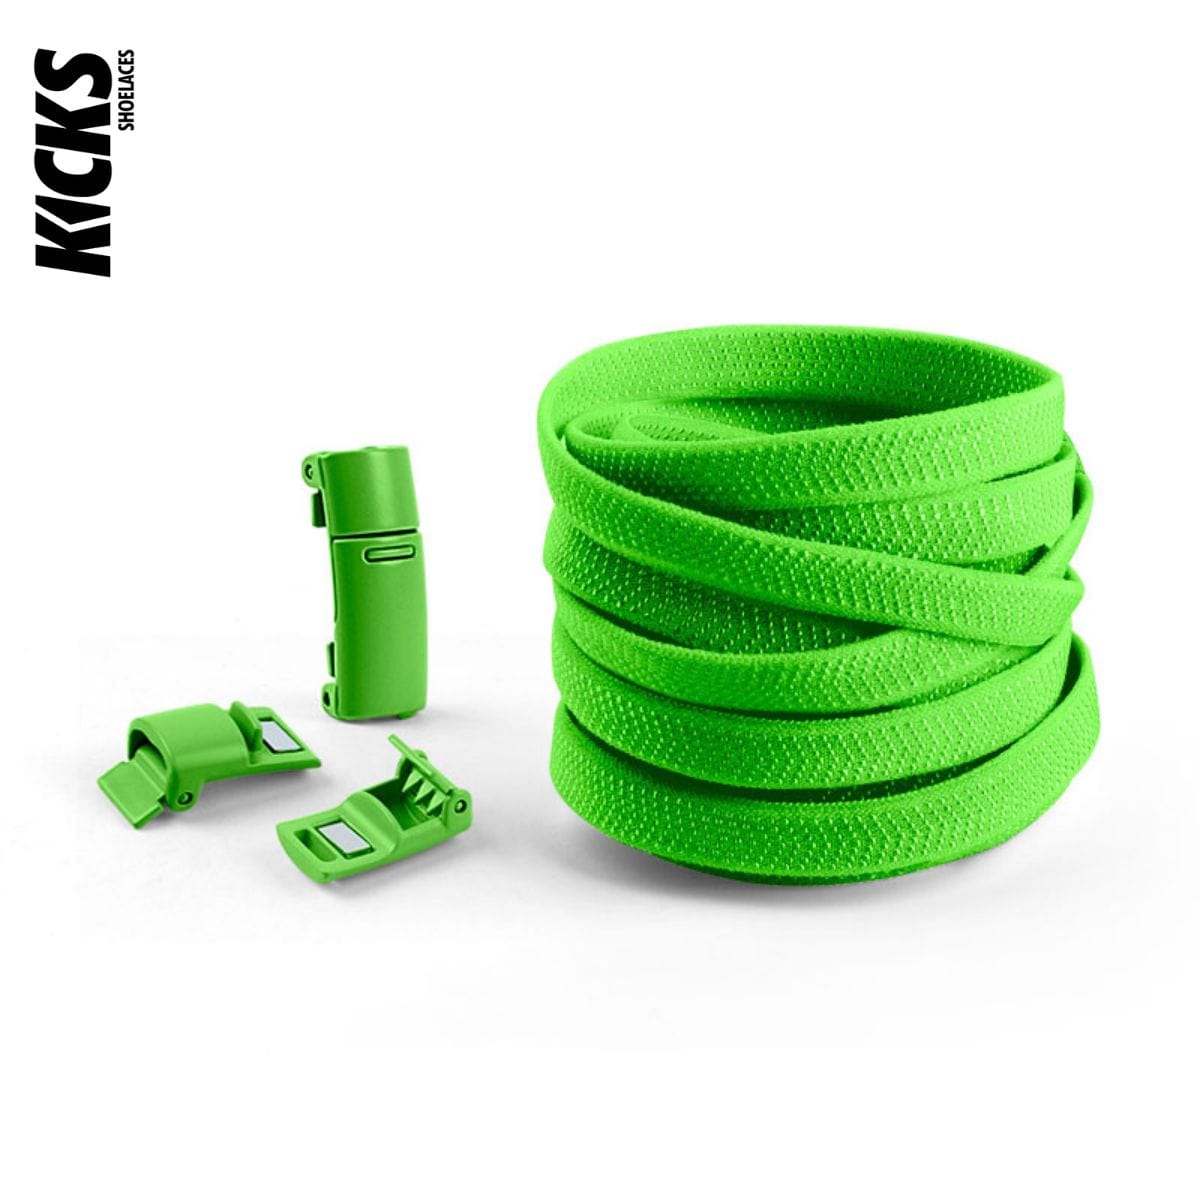 Green No-Tie Shoelaces with Magnetic Locks - Kicks Shoelaces